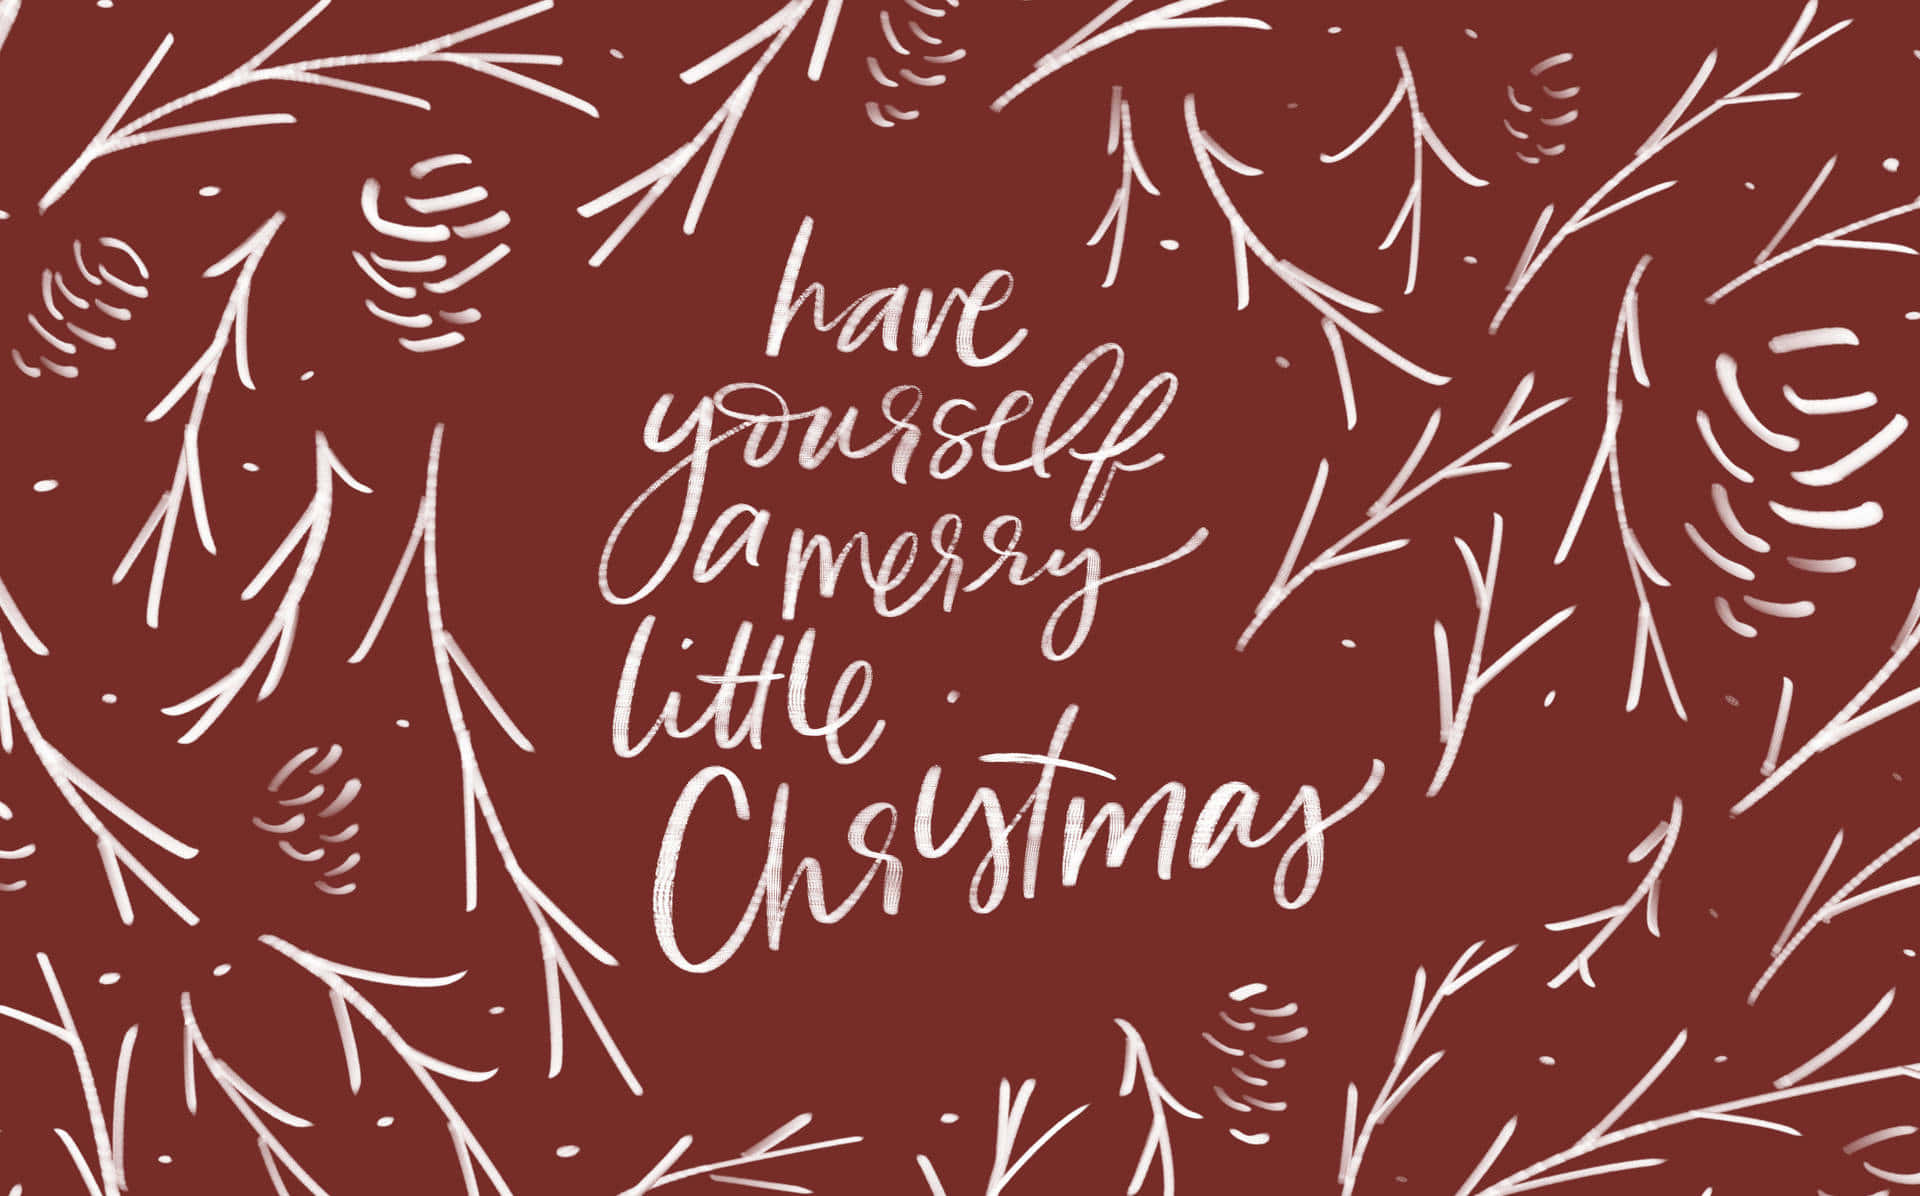 Merry Little Christmas Calligraphy Background Wallpaper